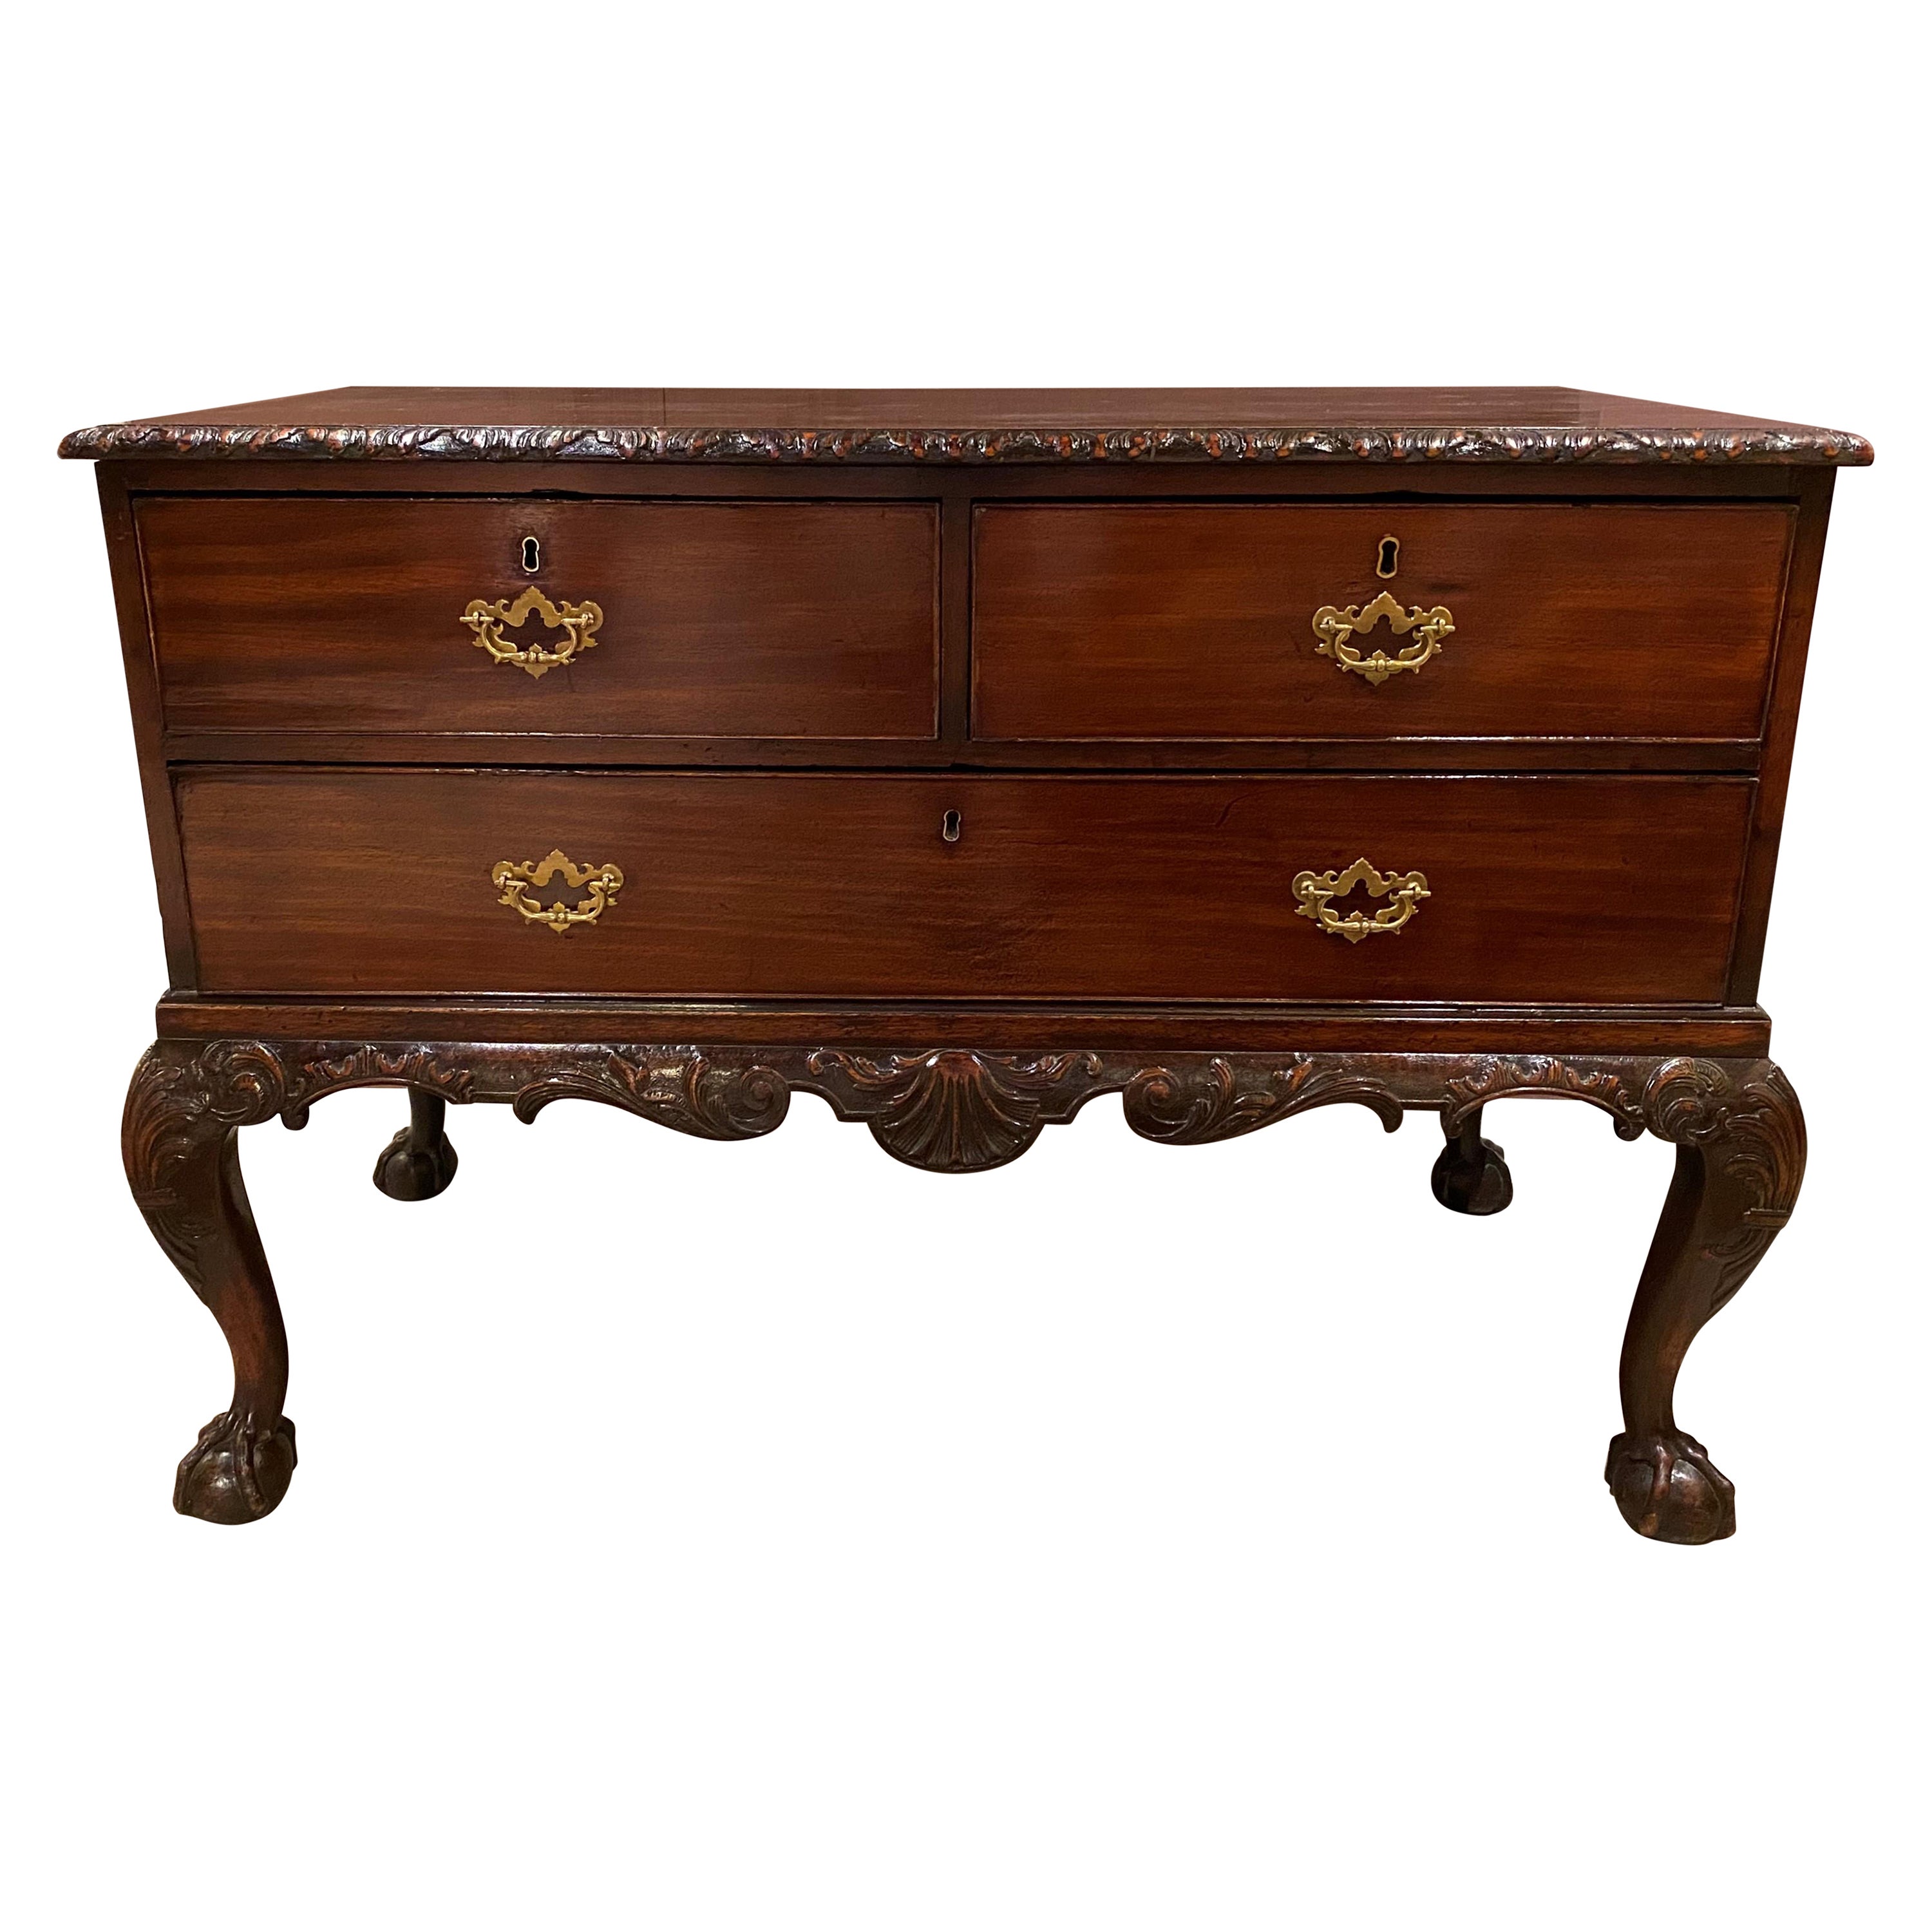 Magnificently Carved 18th Century English Mahogany Commode For Sale